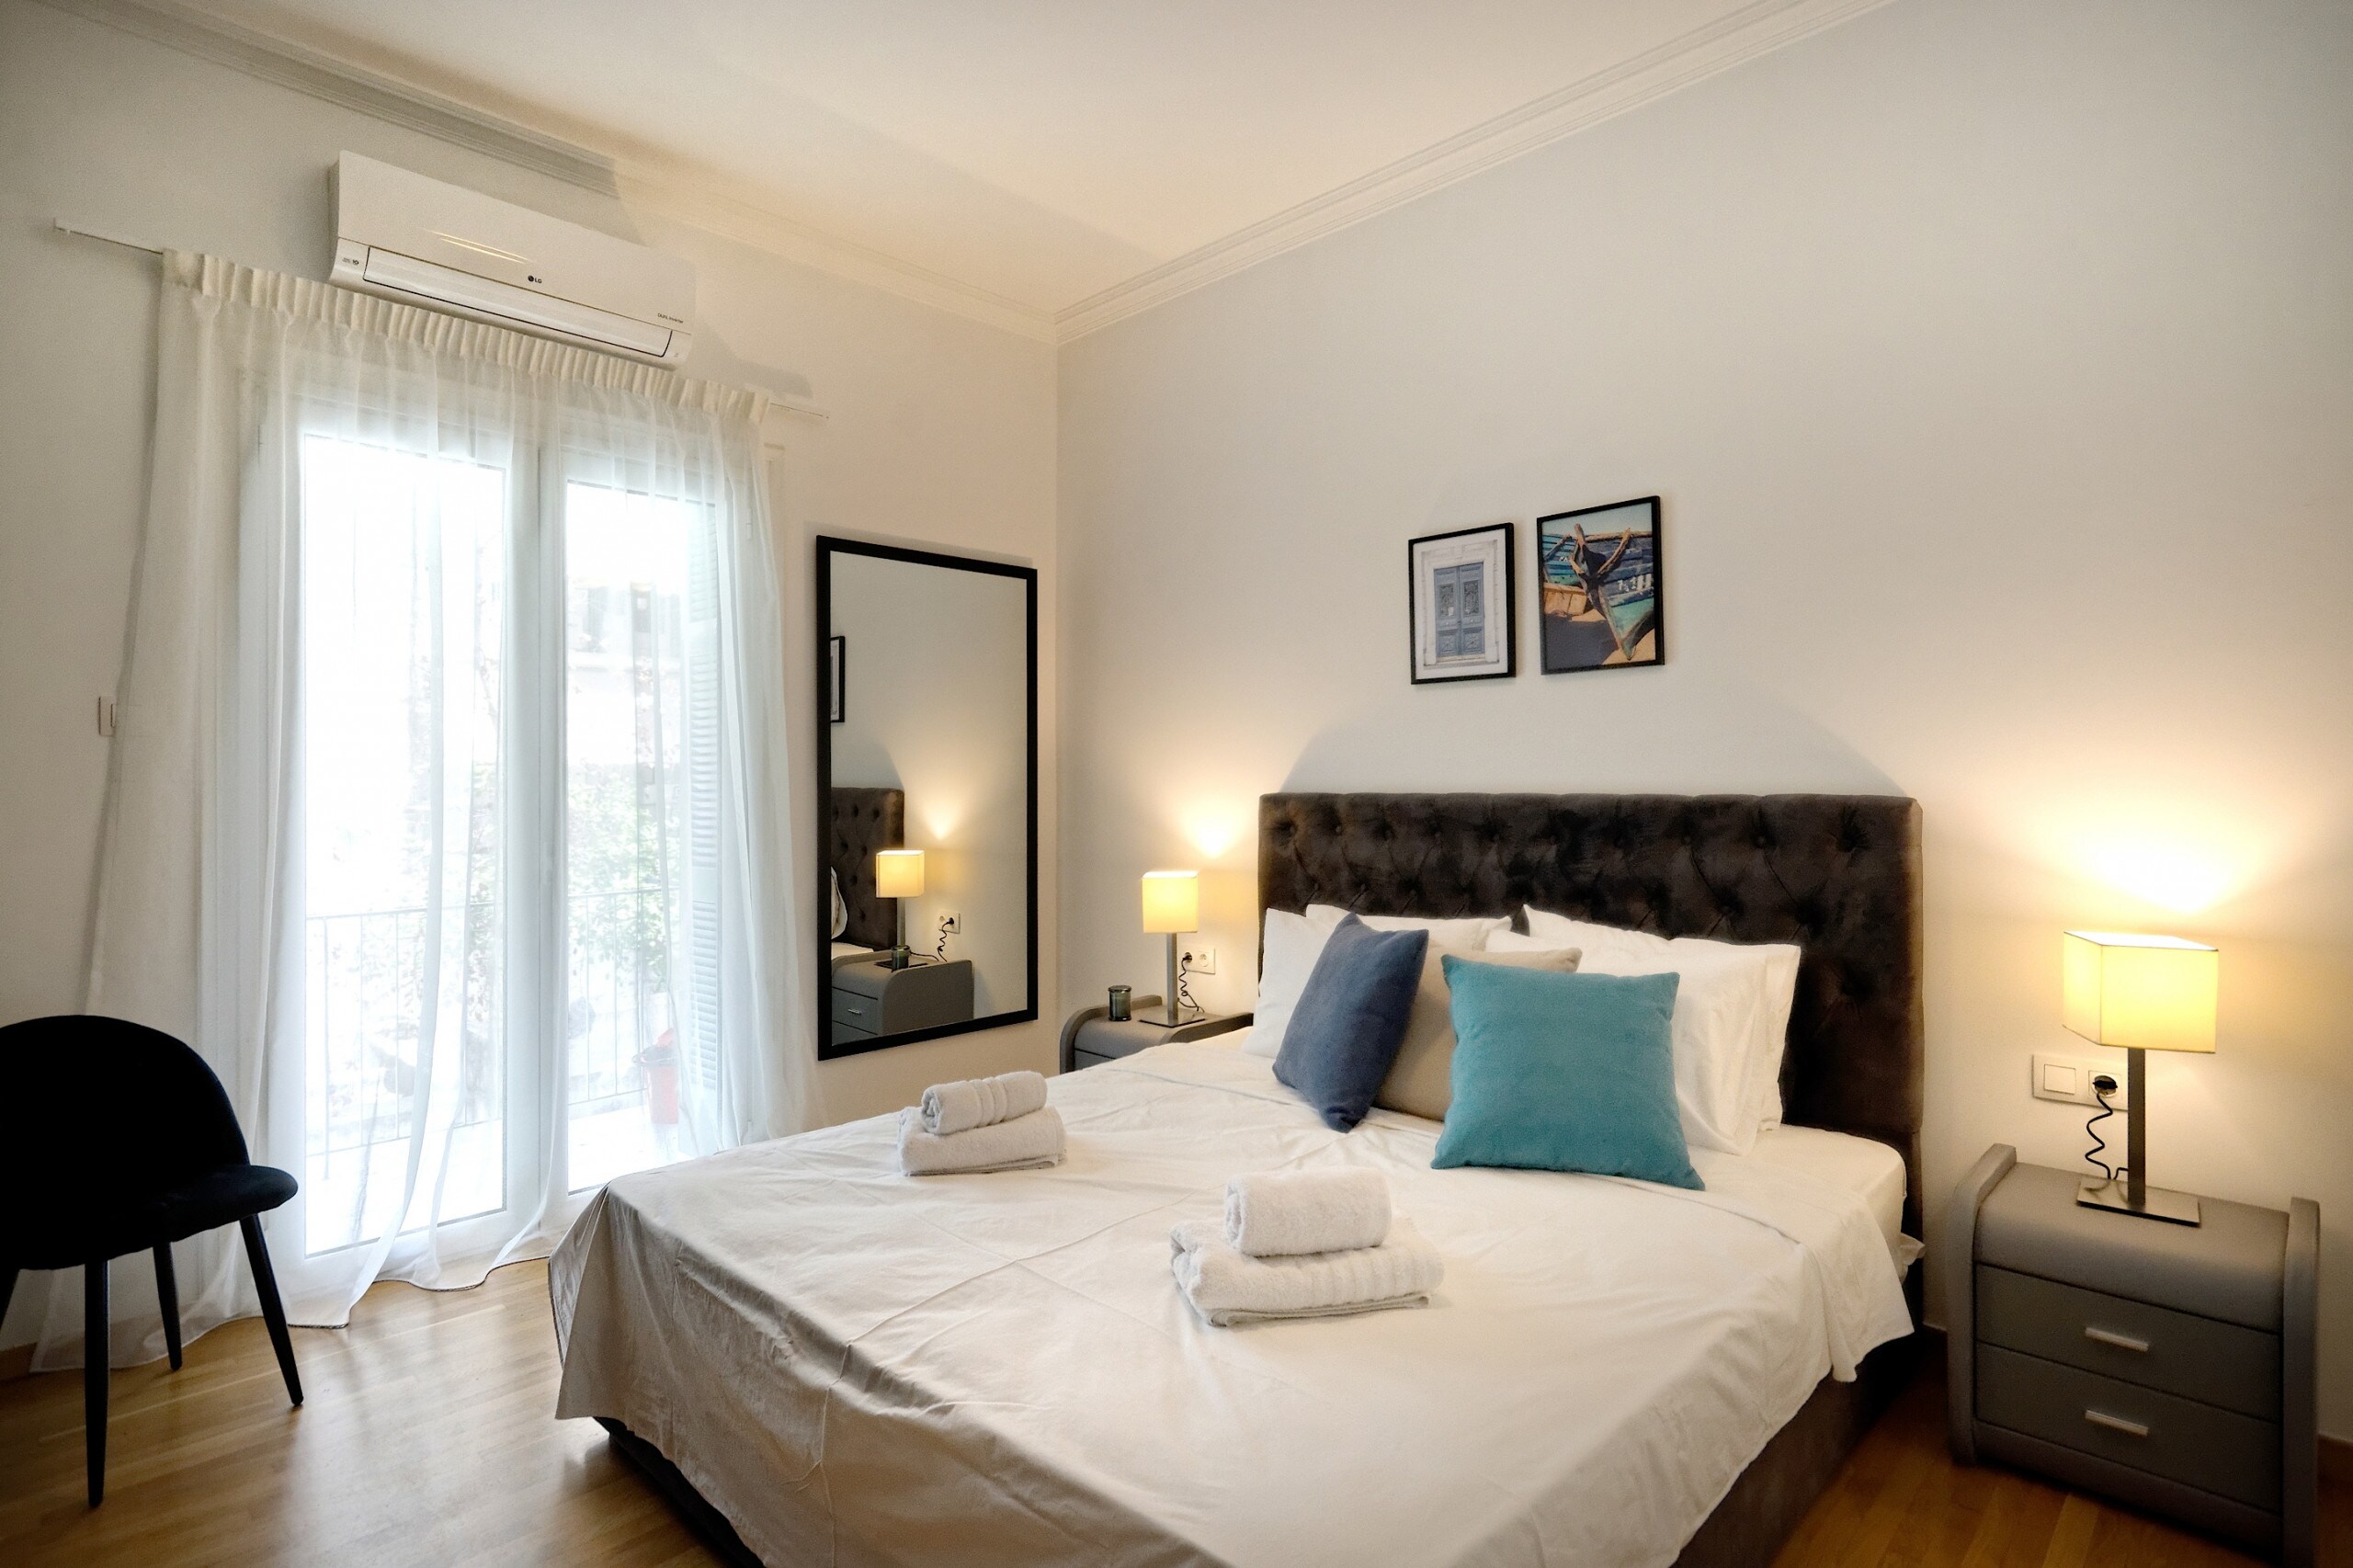 The bedroom is spacious and luminous with a queen bed with a high-quality mattress and beddings and beautiful artwork